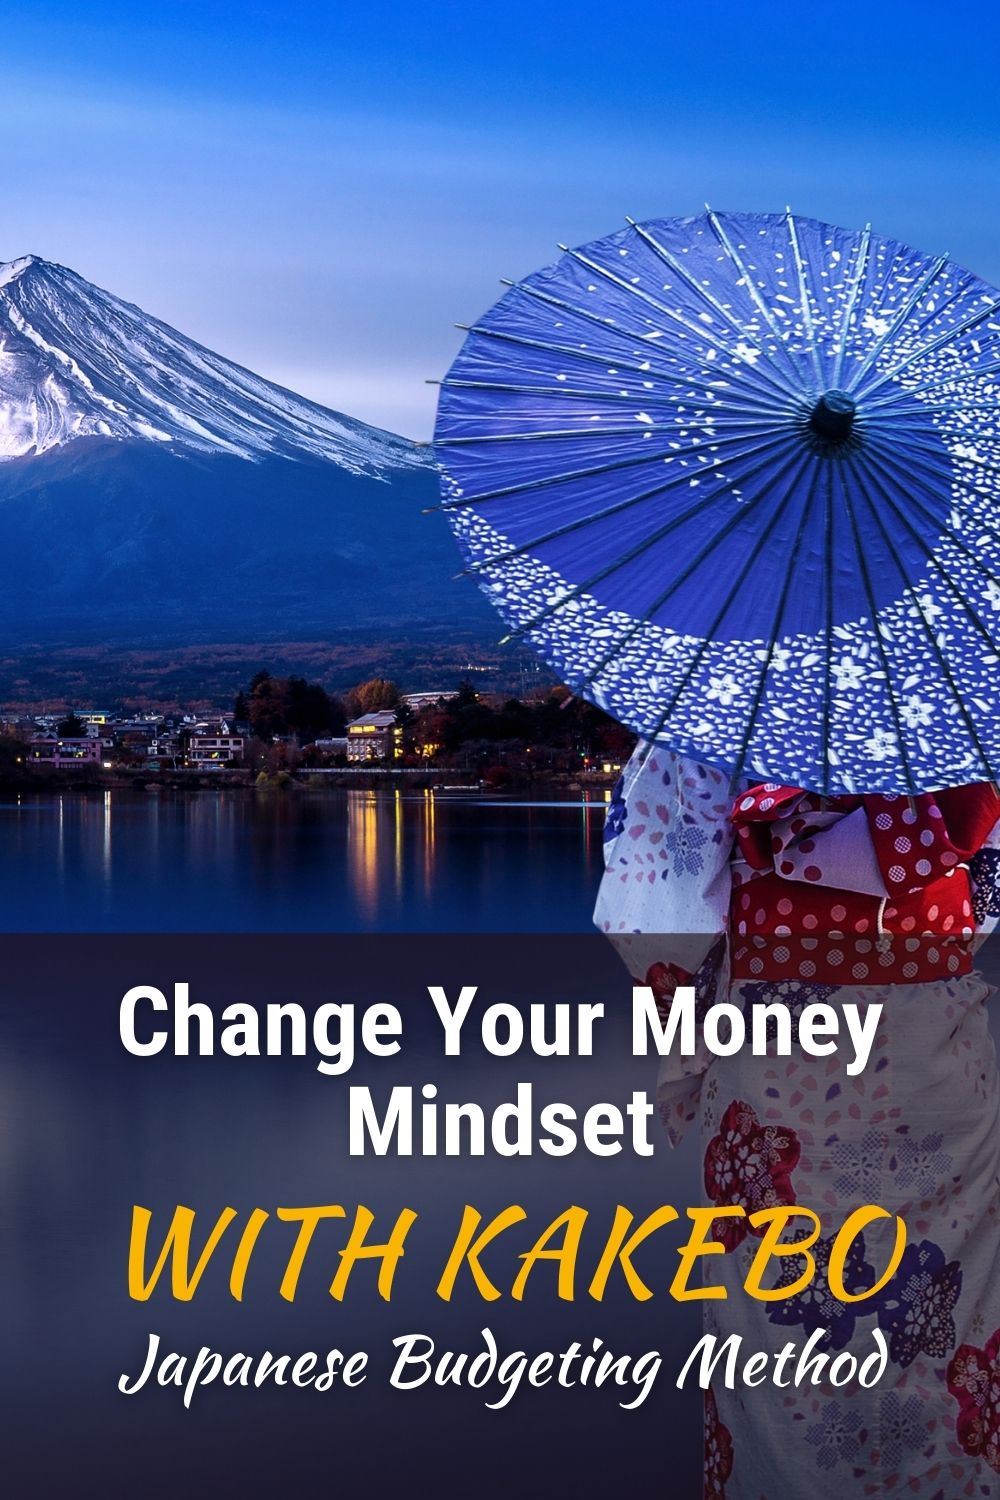 Kakebo: how budgeting the Japanese way makes you mindful (and richer)